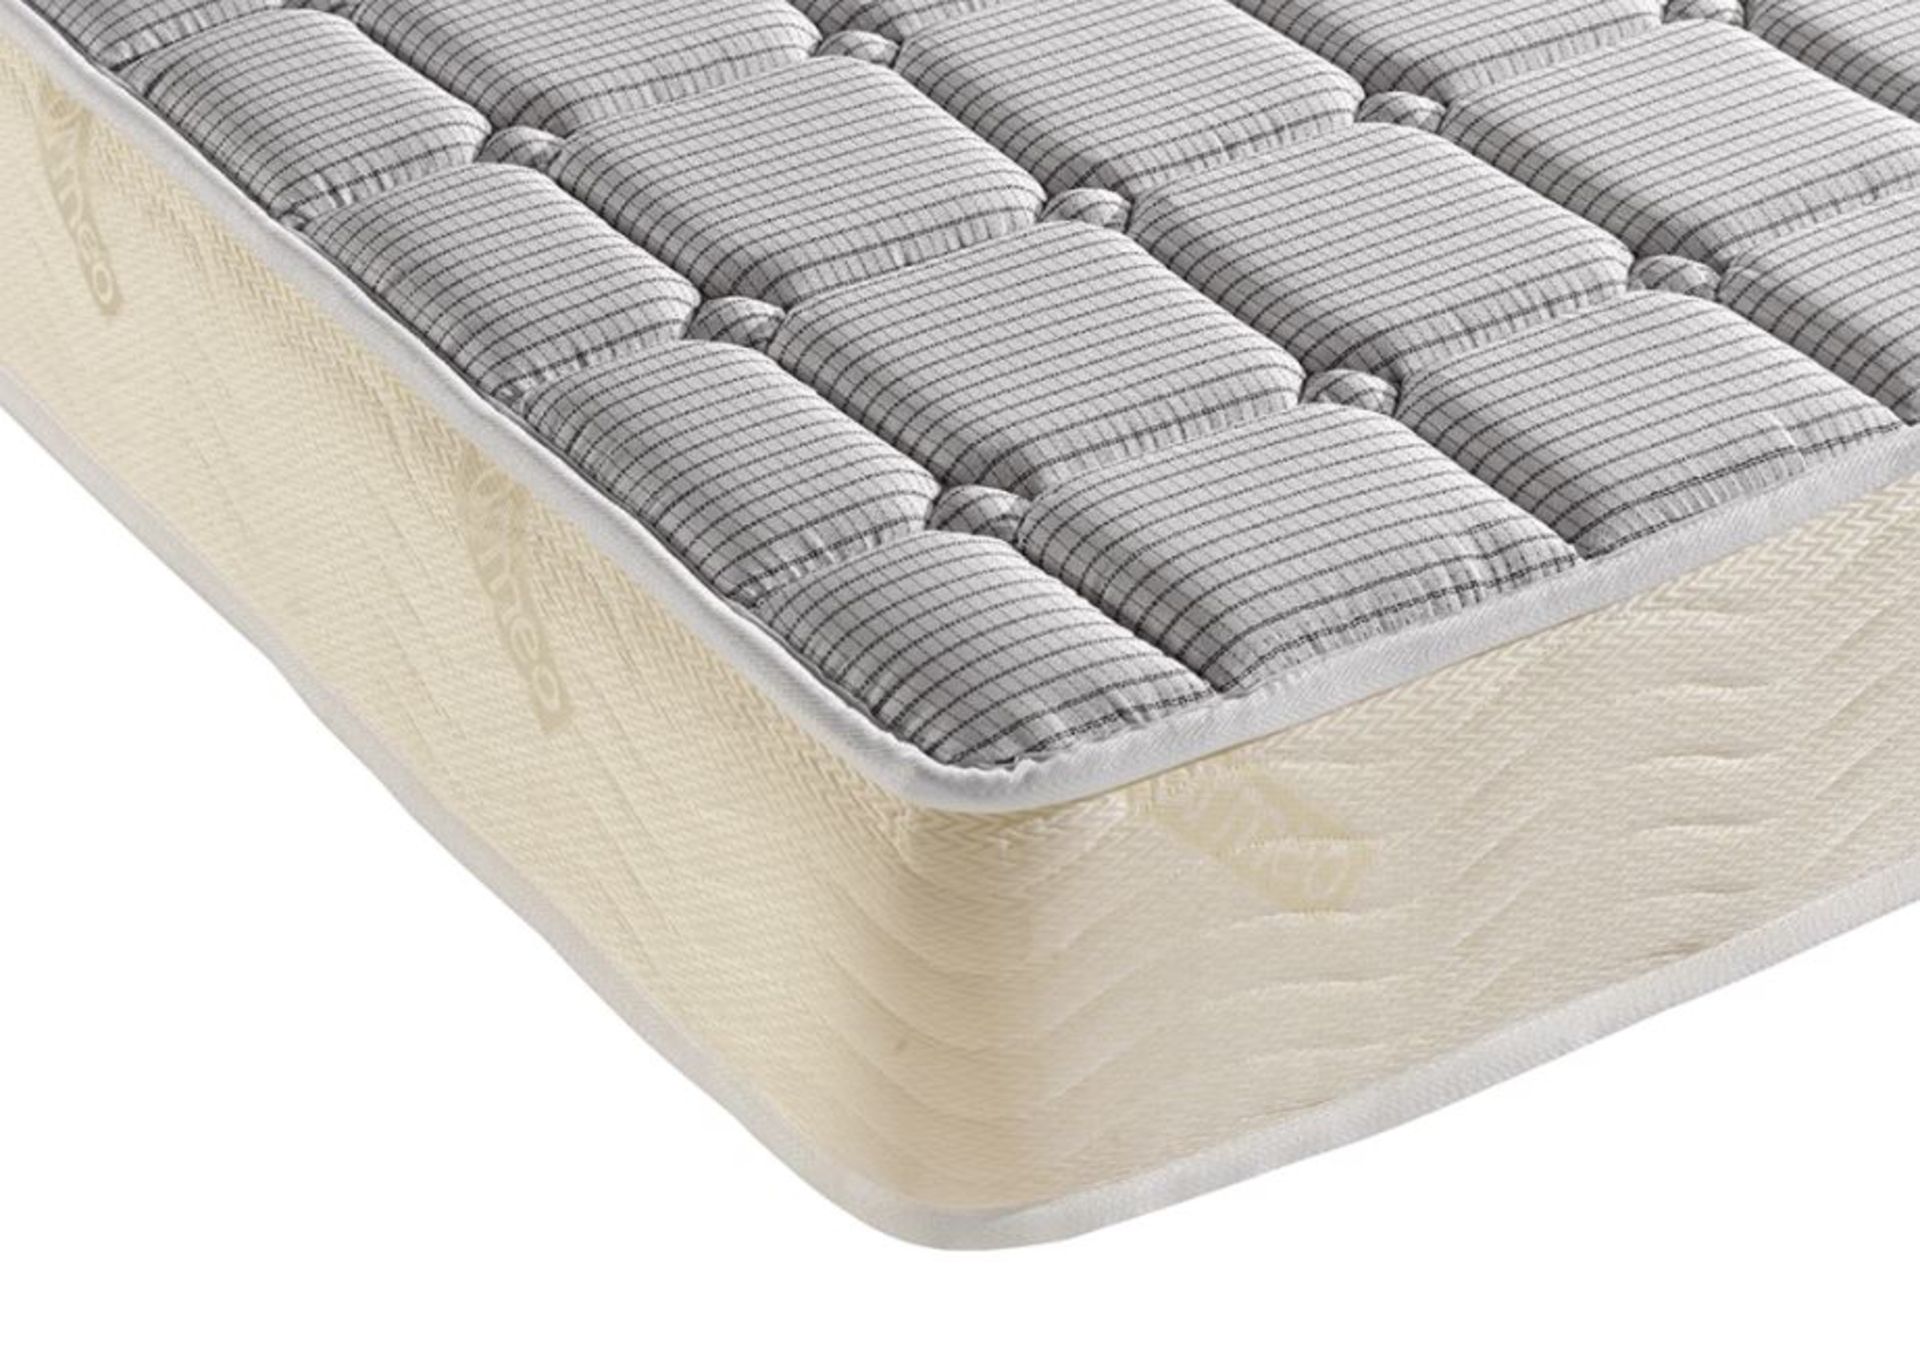 1 DOUBLE SIZE DORMEO MEMORY PLUS SPRUNG MATTRESS RRP Â£199 (PICTURES FOR ILLUSTRATION PURPOSES